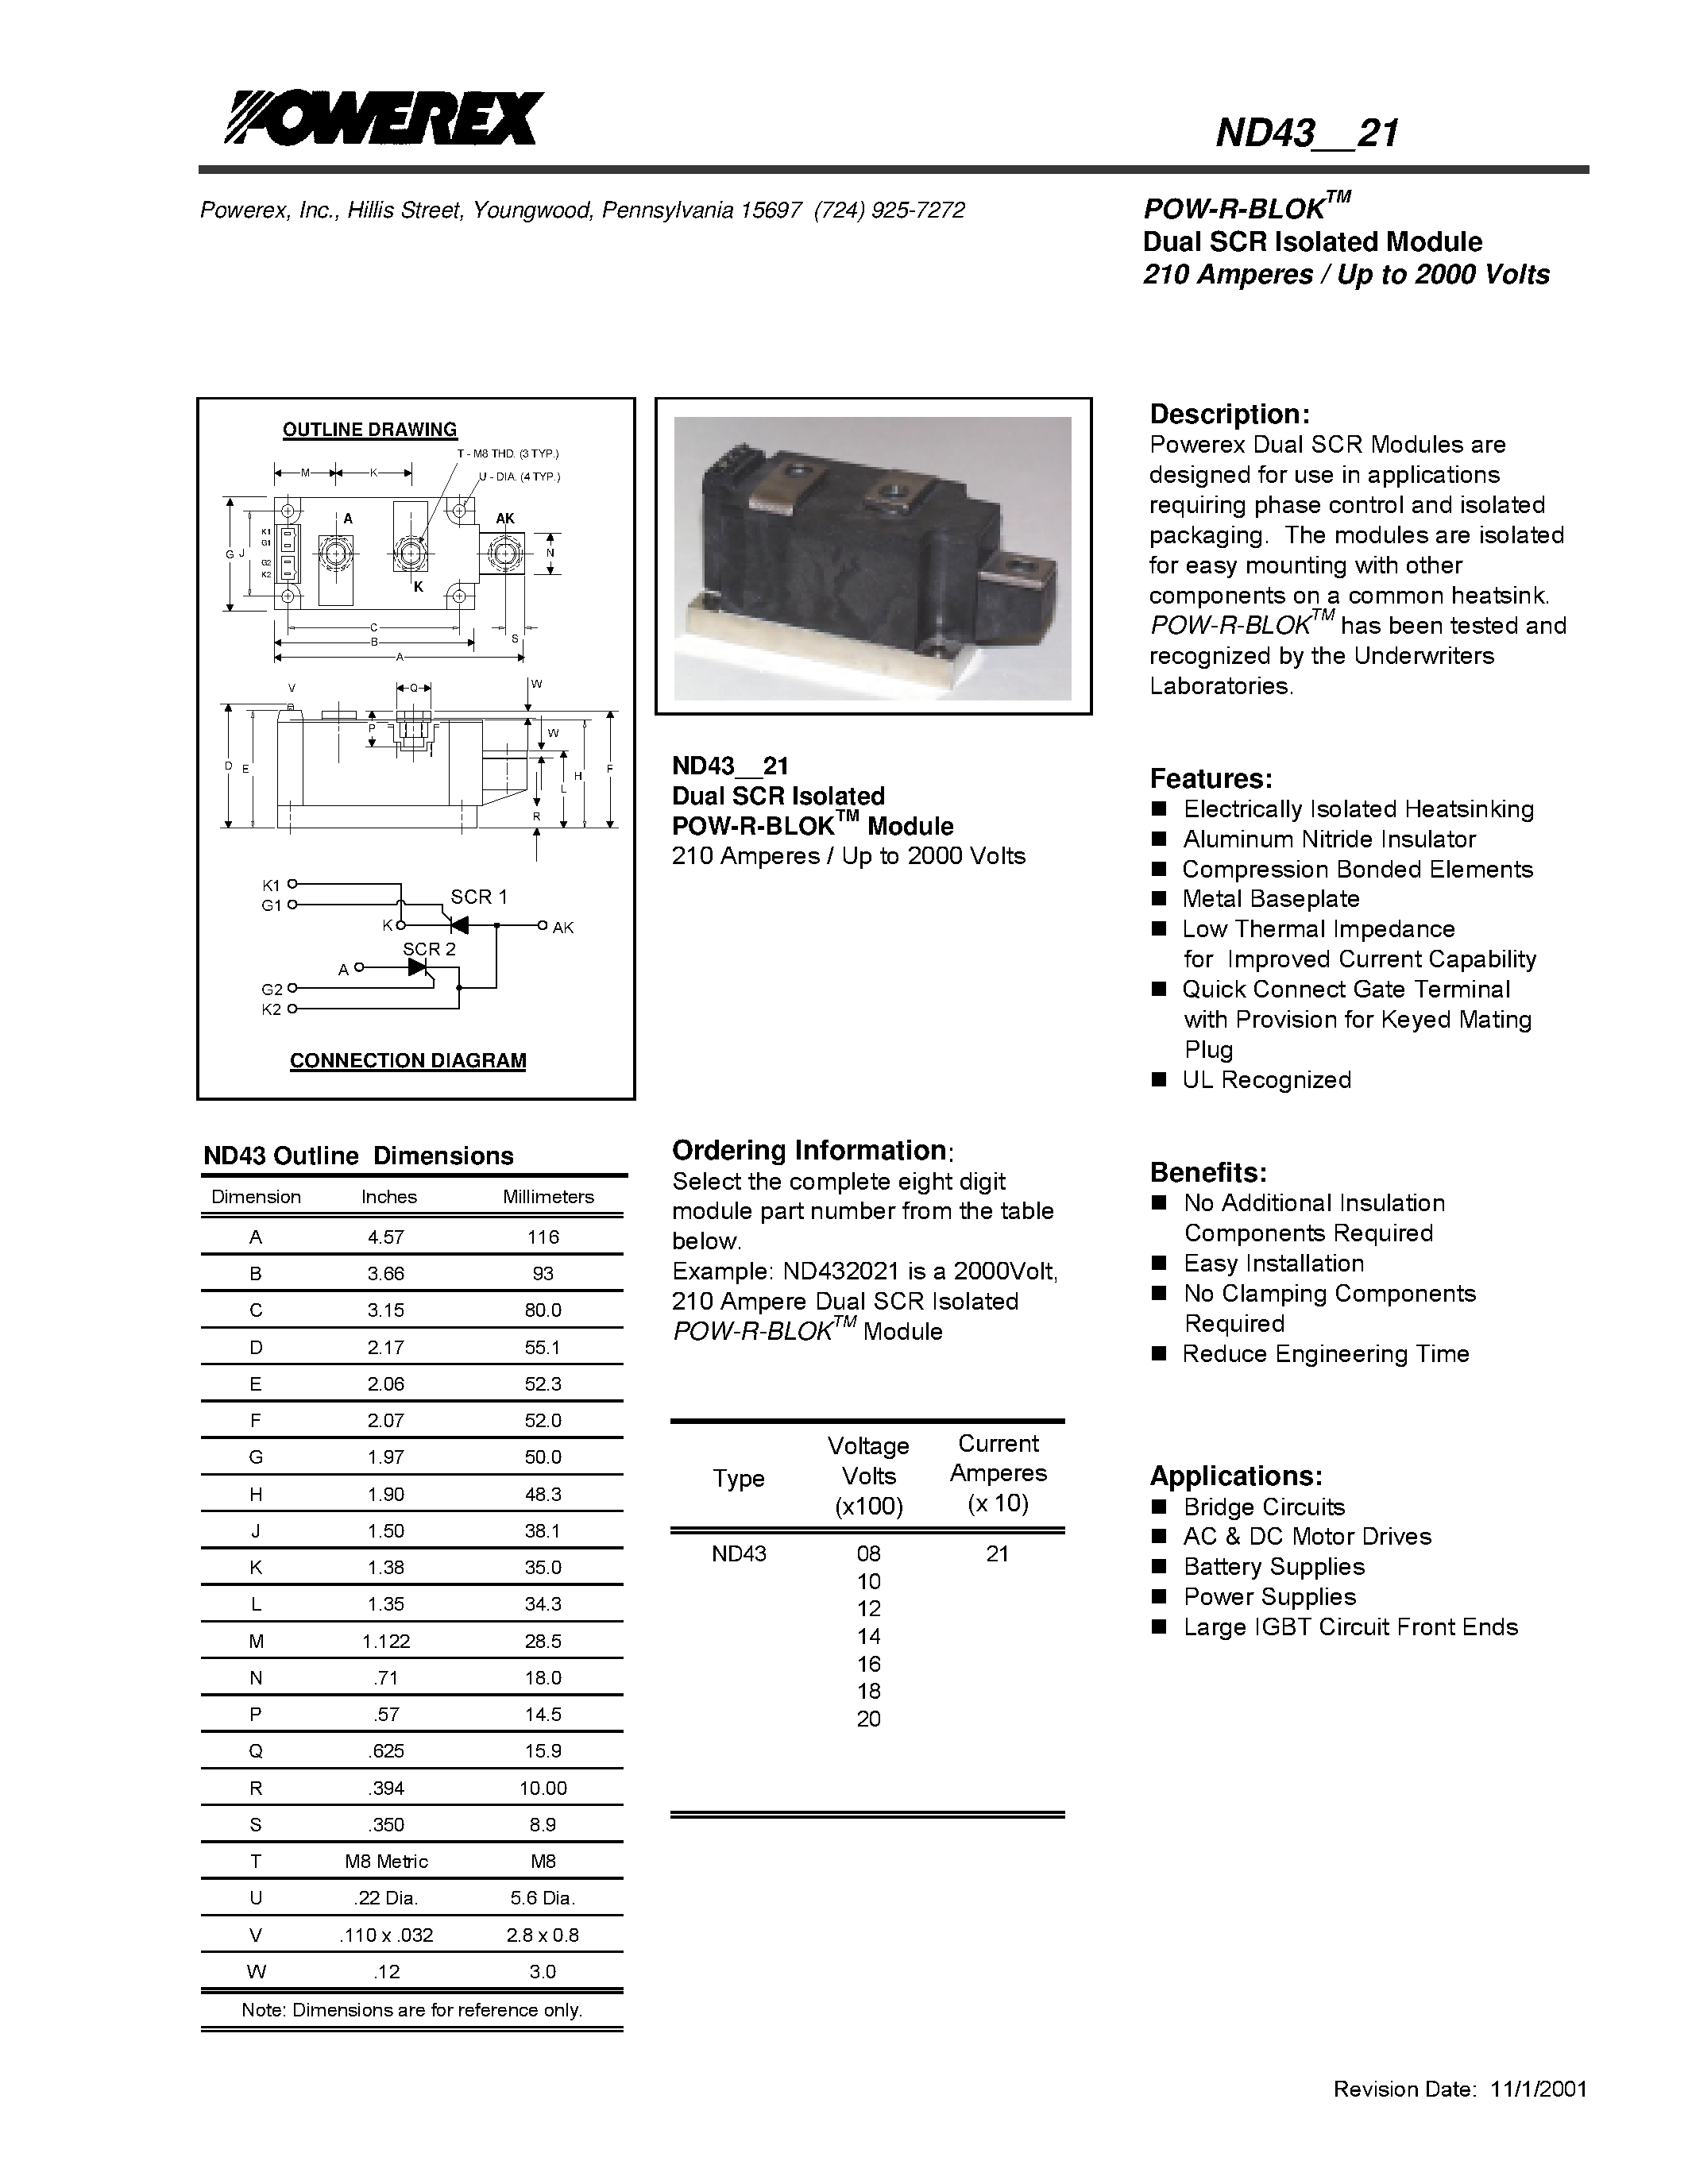 Datasheet ND431821 - POW-R-BLOK Dual SCR Isolated Module (210 Amperes / Up to 2000 Volts) page 1